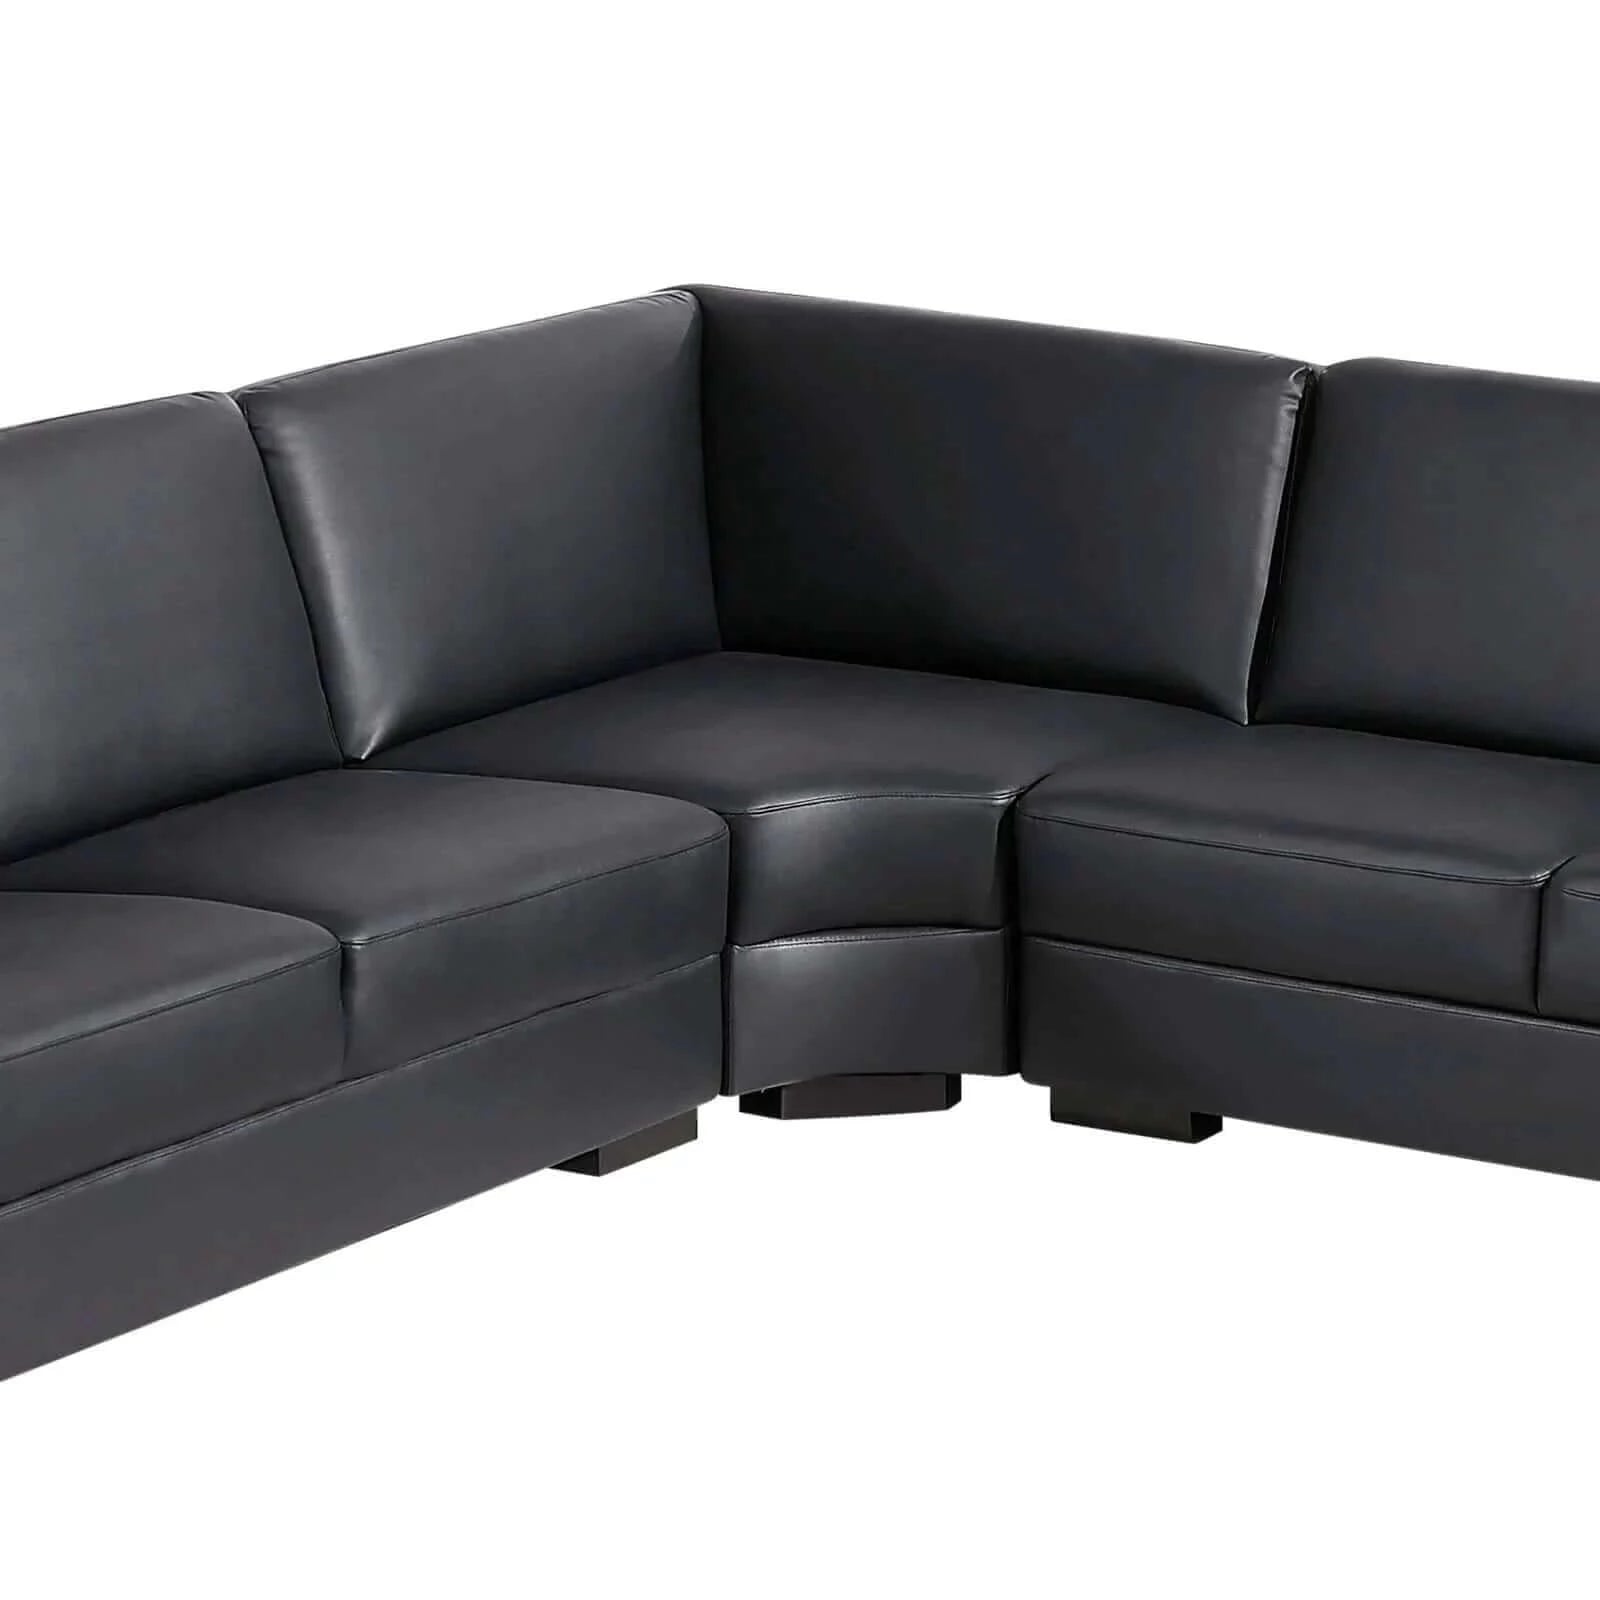 Buy lounge set luxurious 6 seater bonded leather corner sofa living room couch in black with chaise - upinteriors-Upinteriors